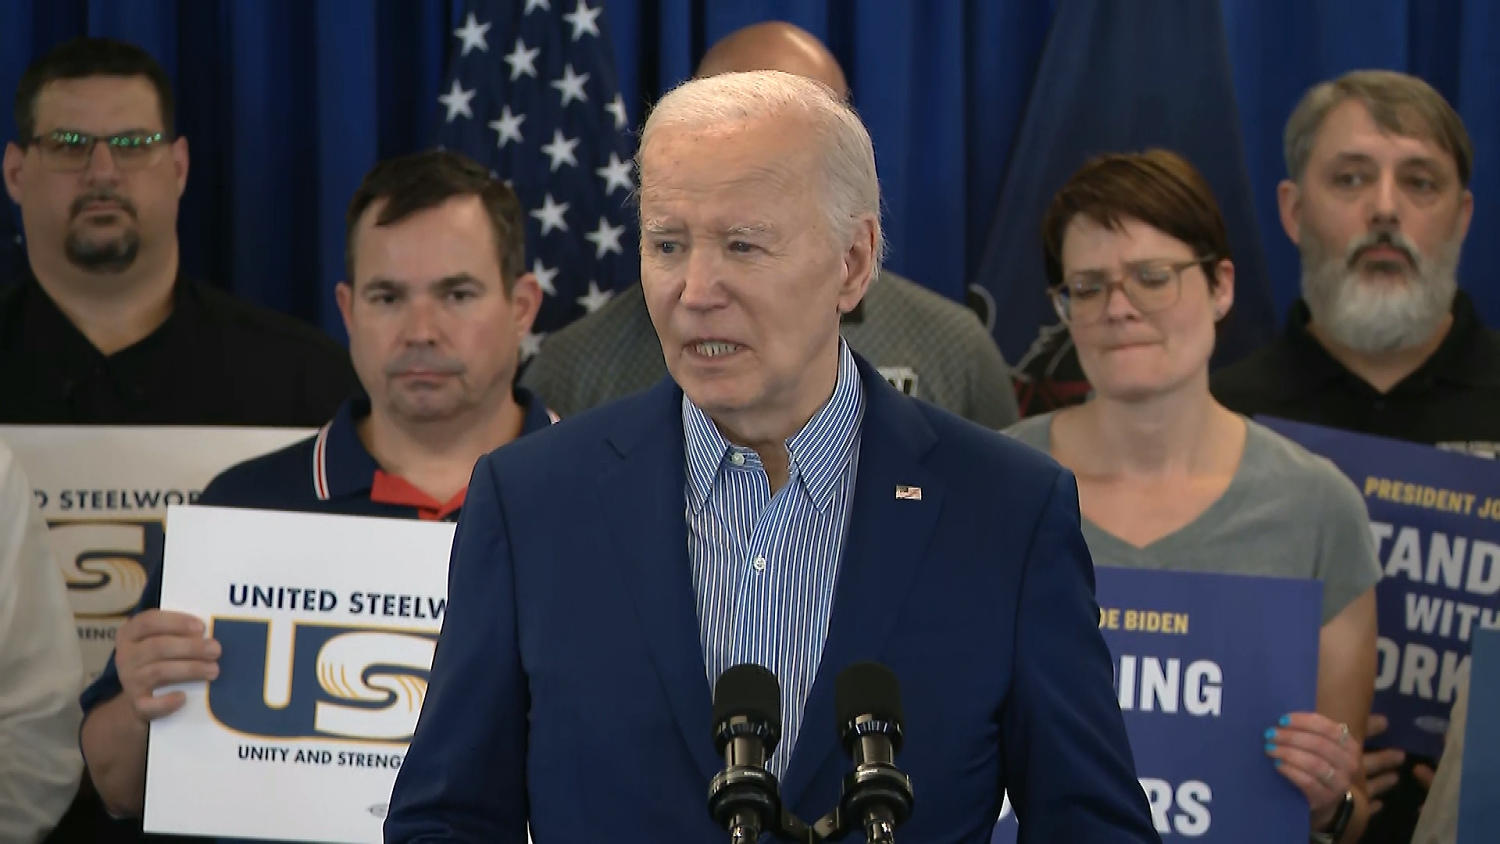 Biden says Trump 'doesn't deserve to have been commander in chief for my son'